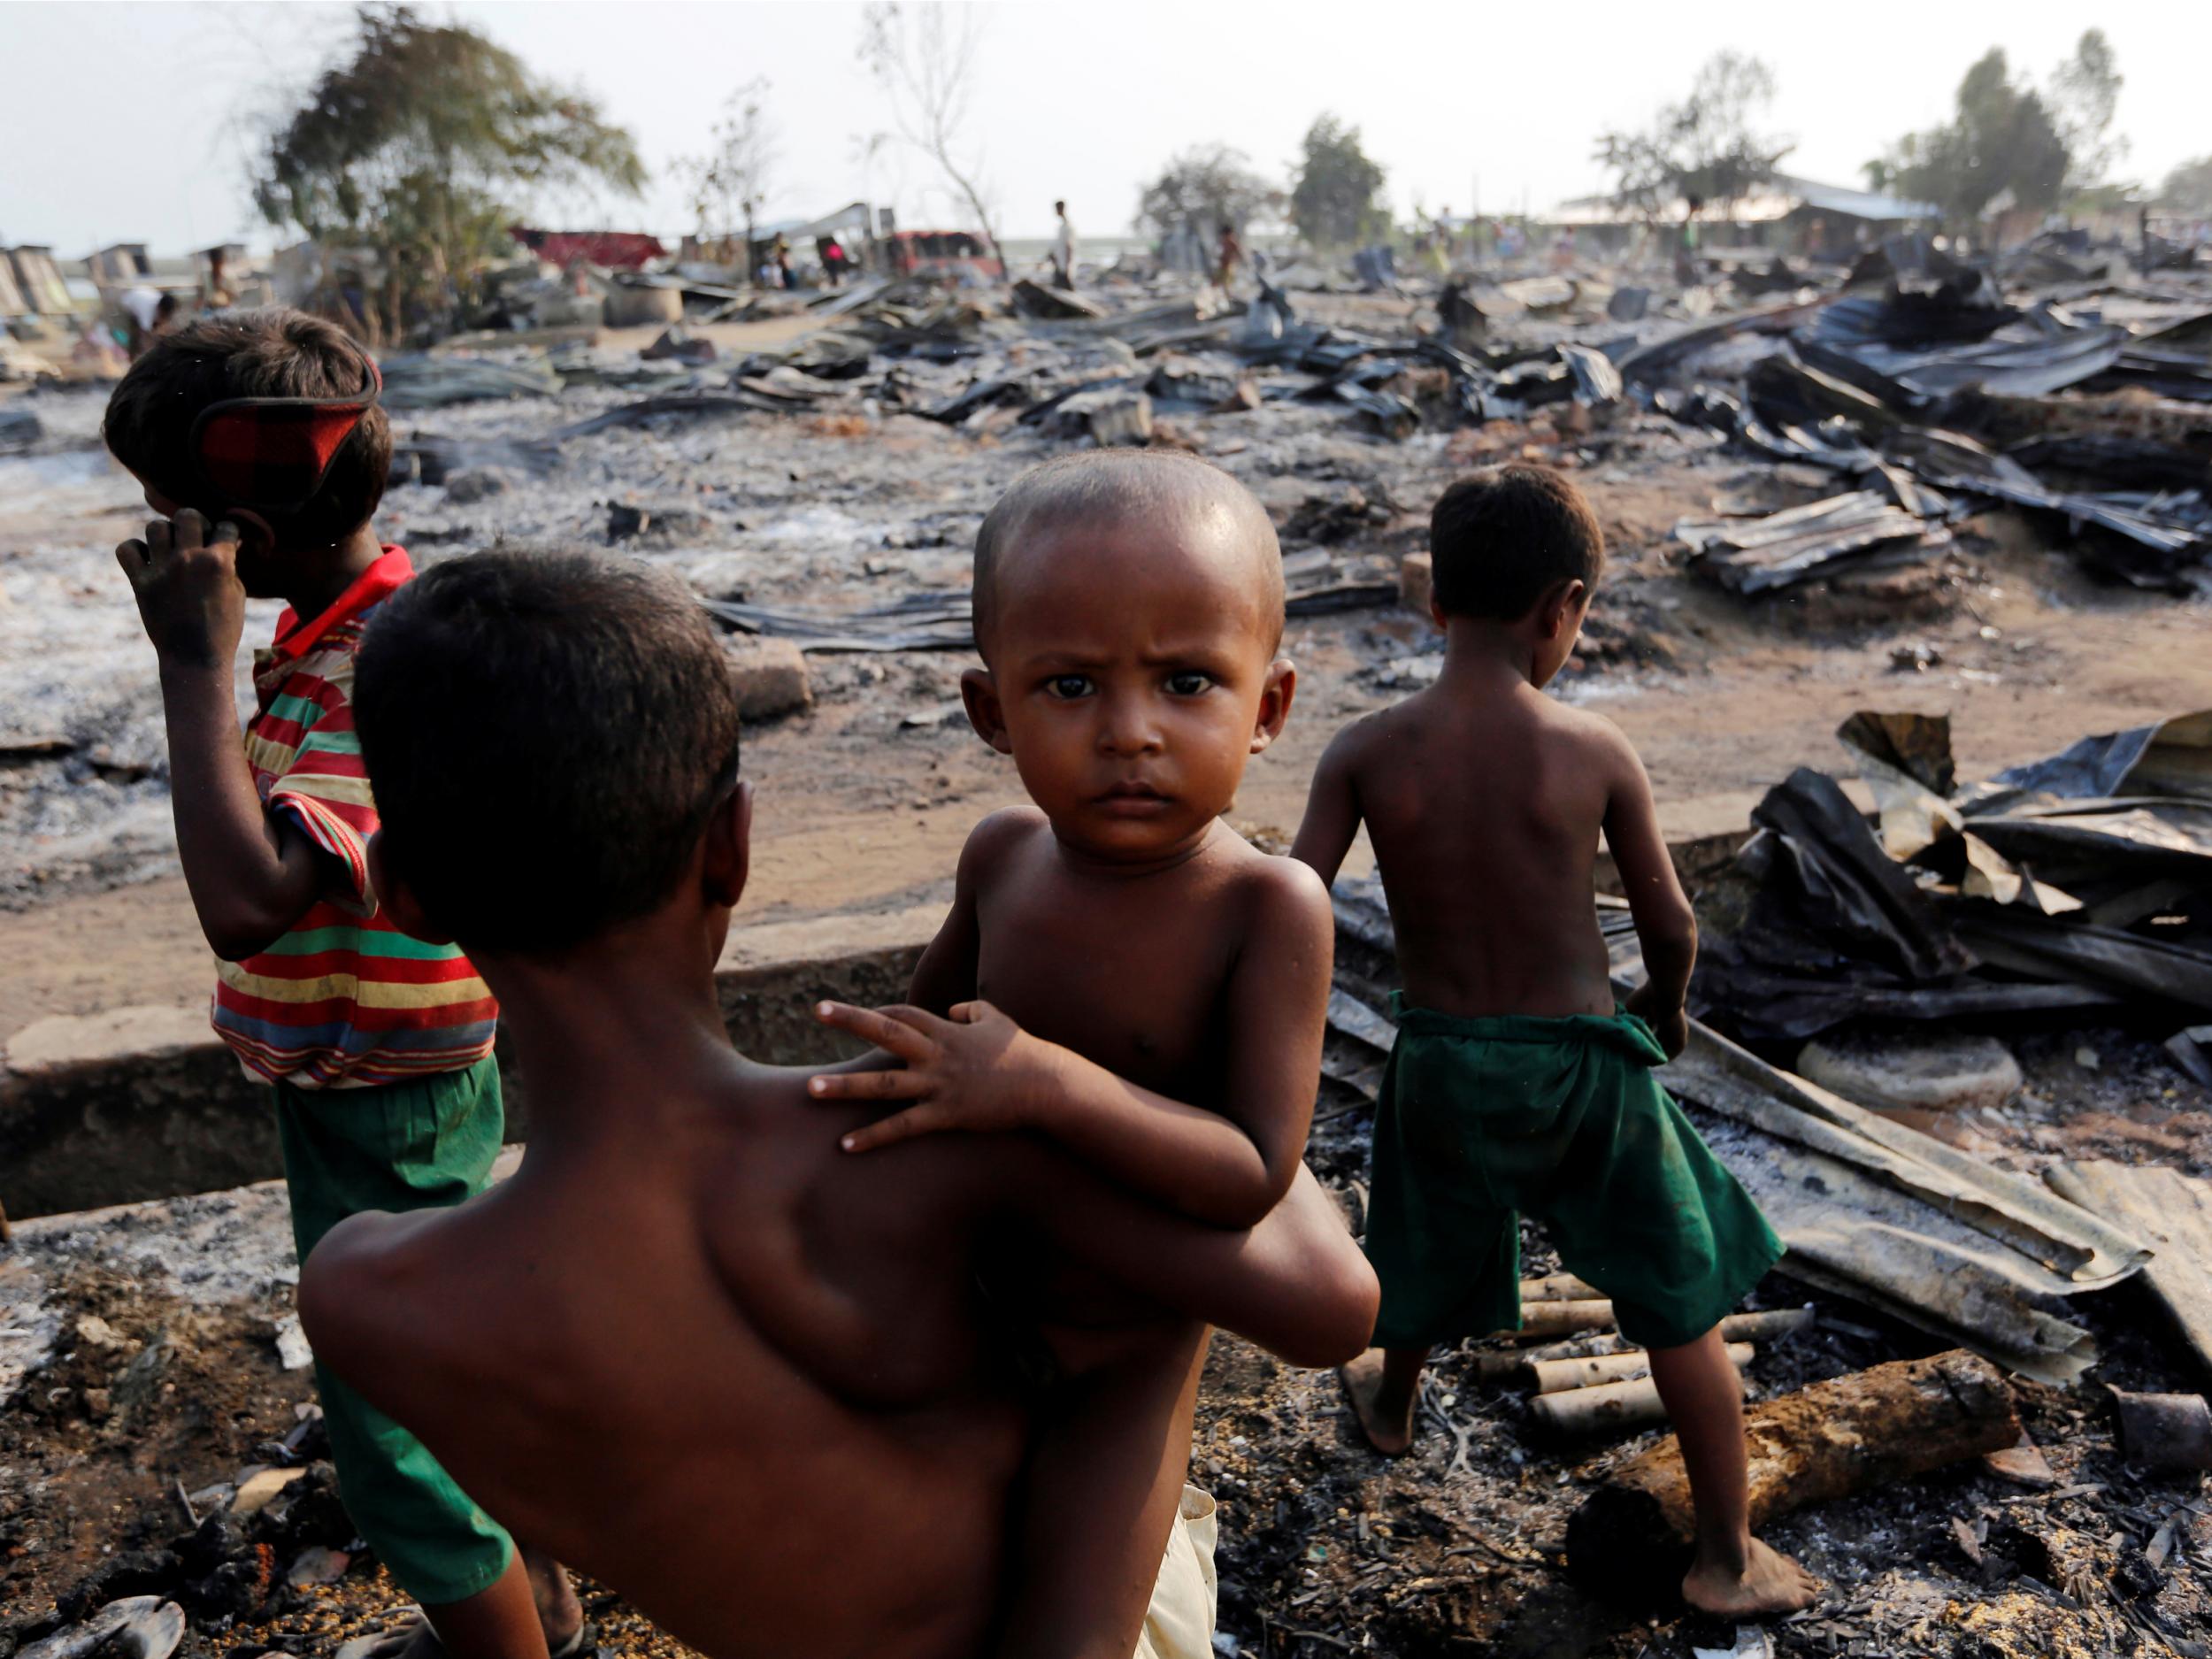 Boys stand among debris after fire destroyed shelters at a camp for internally displaced Rohingya Muslims in the western Rakhine State